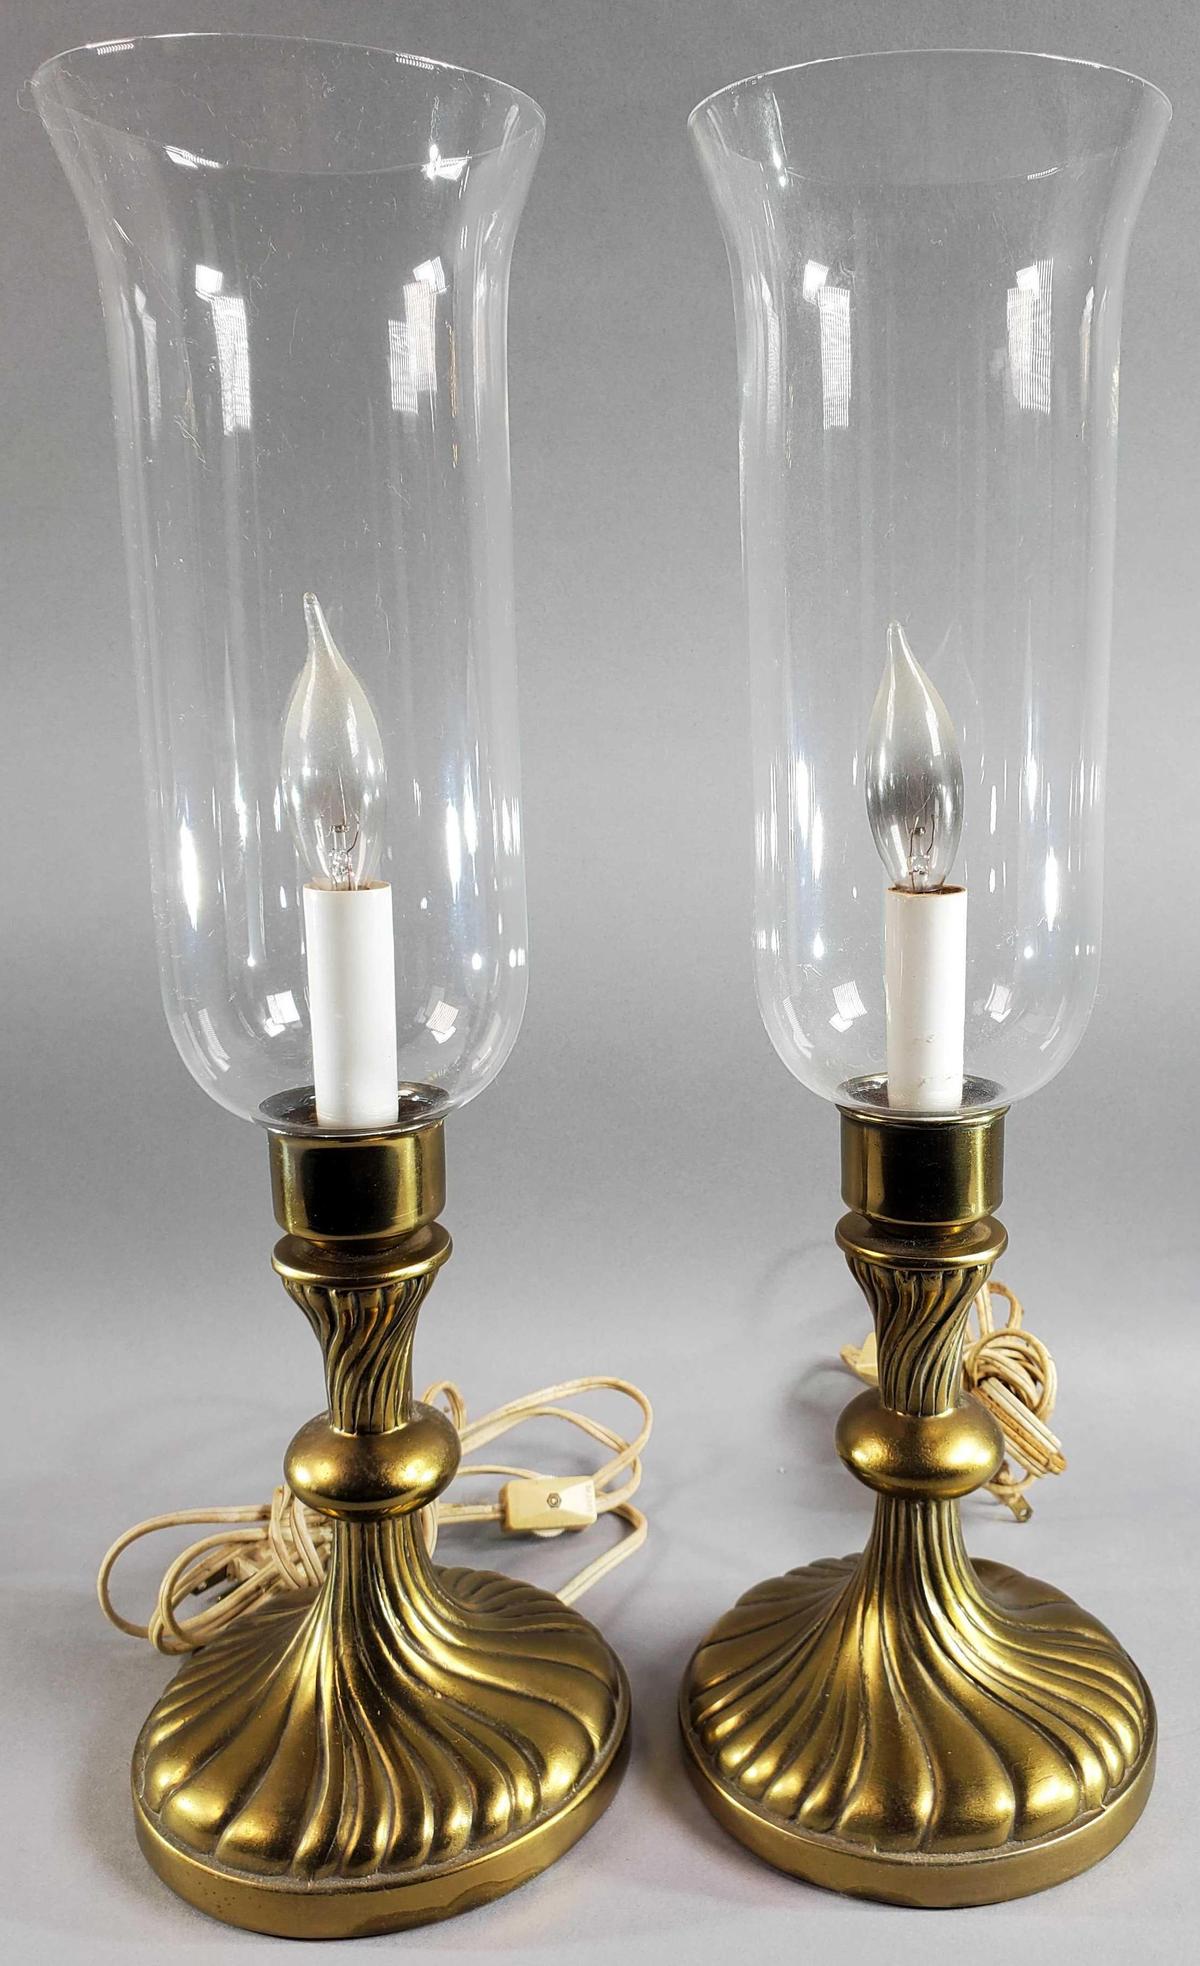 Pair of Candle Style Parlor Lamps w/ Brass Bases & (1) Brass Table Lamp (LPO)